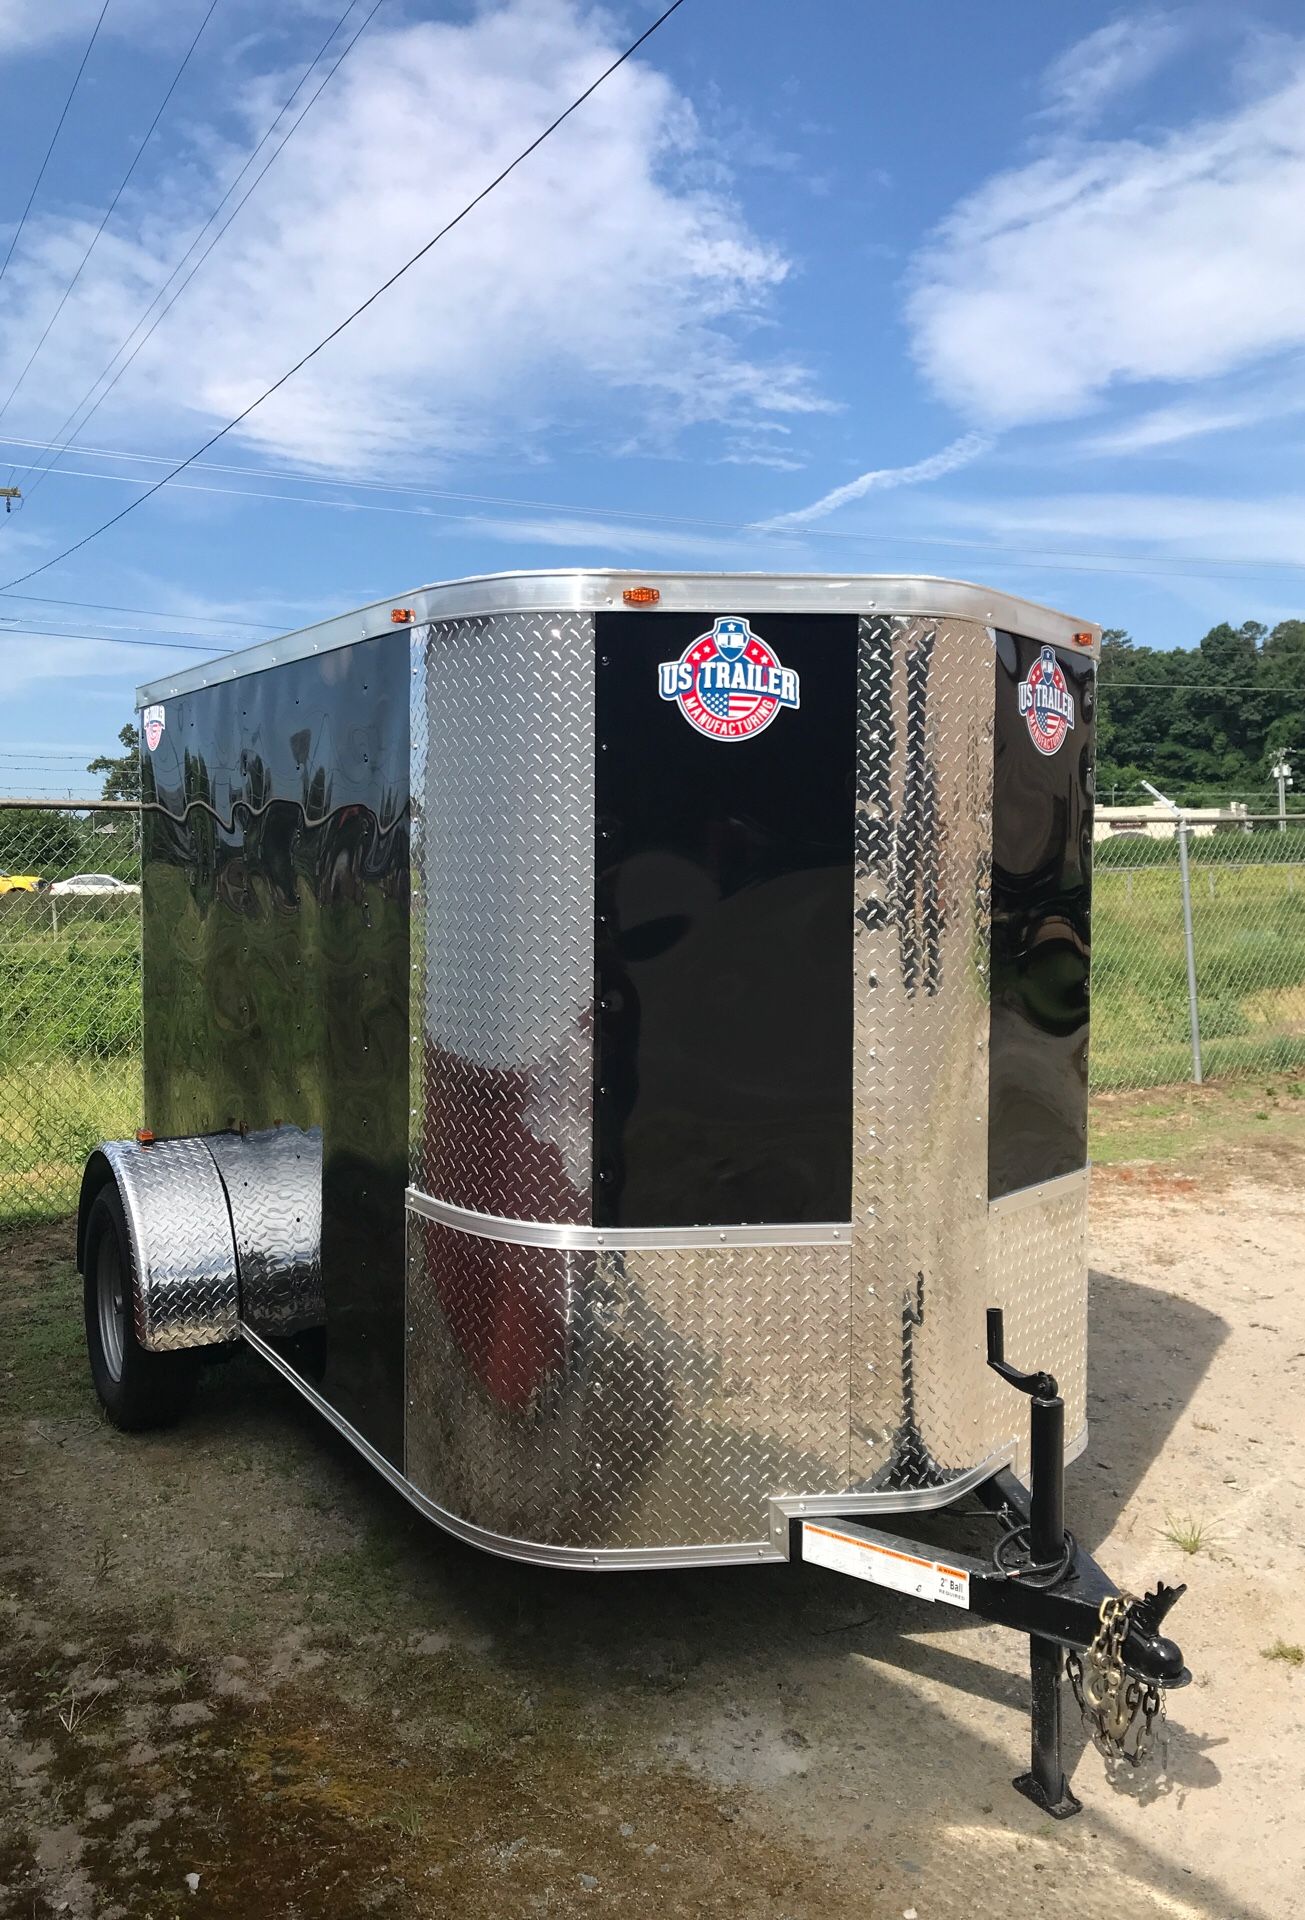 NEW 2020 5x8 enclosed trailer!!!